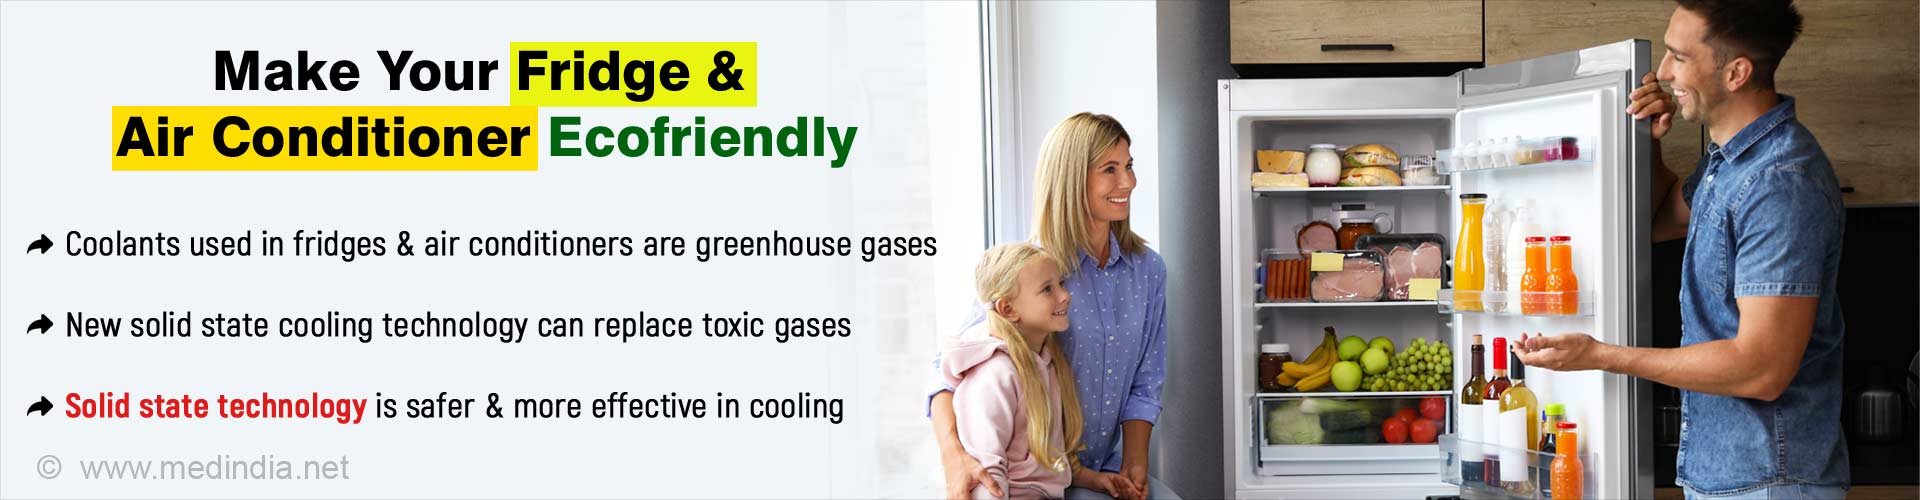 Make your fridge and air conditioner ecofriendly. Coolants used in fridges and air conditioners are greenhouse gases. New solid state cooling technology can replace toxic gases. Solid state technology is safer and more effective in cooling.